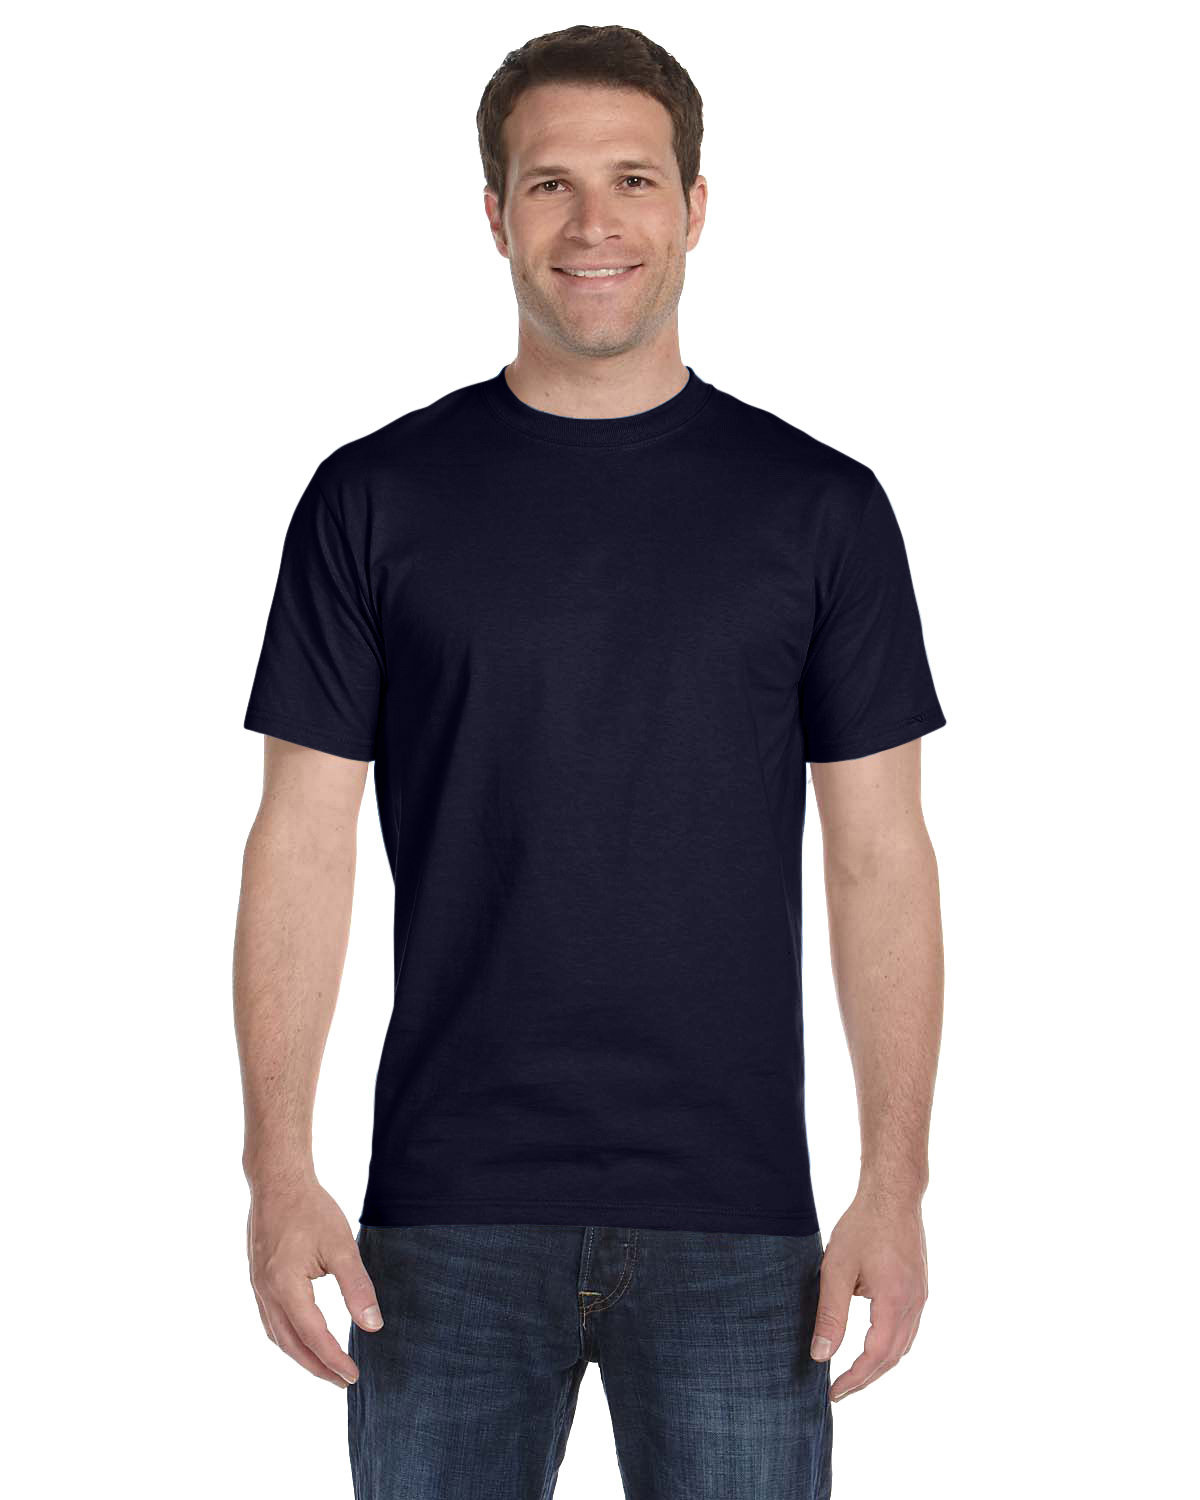 Hanes Adult Essential Short Sleeve T-Shirt athletic navy 